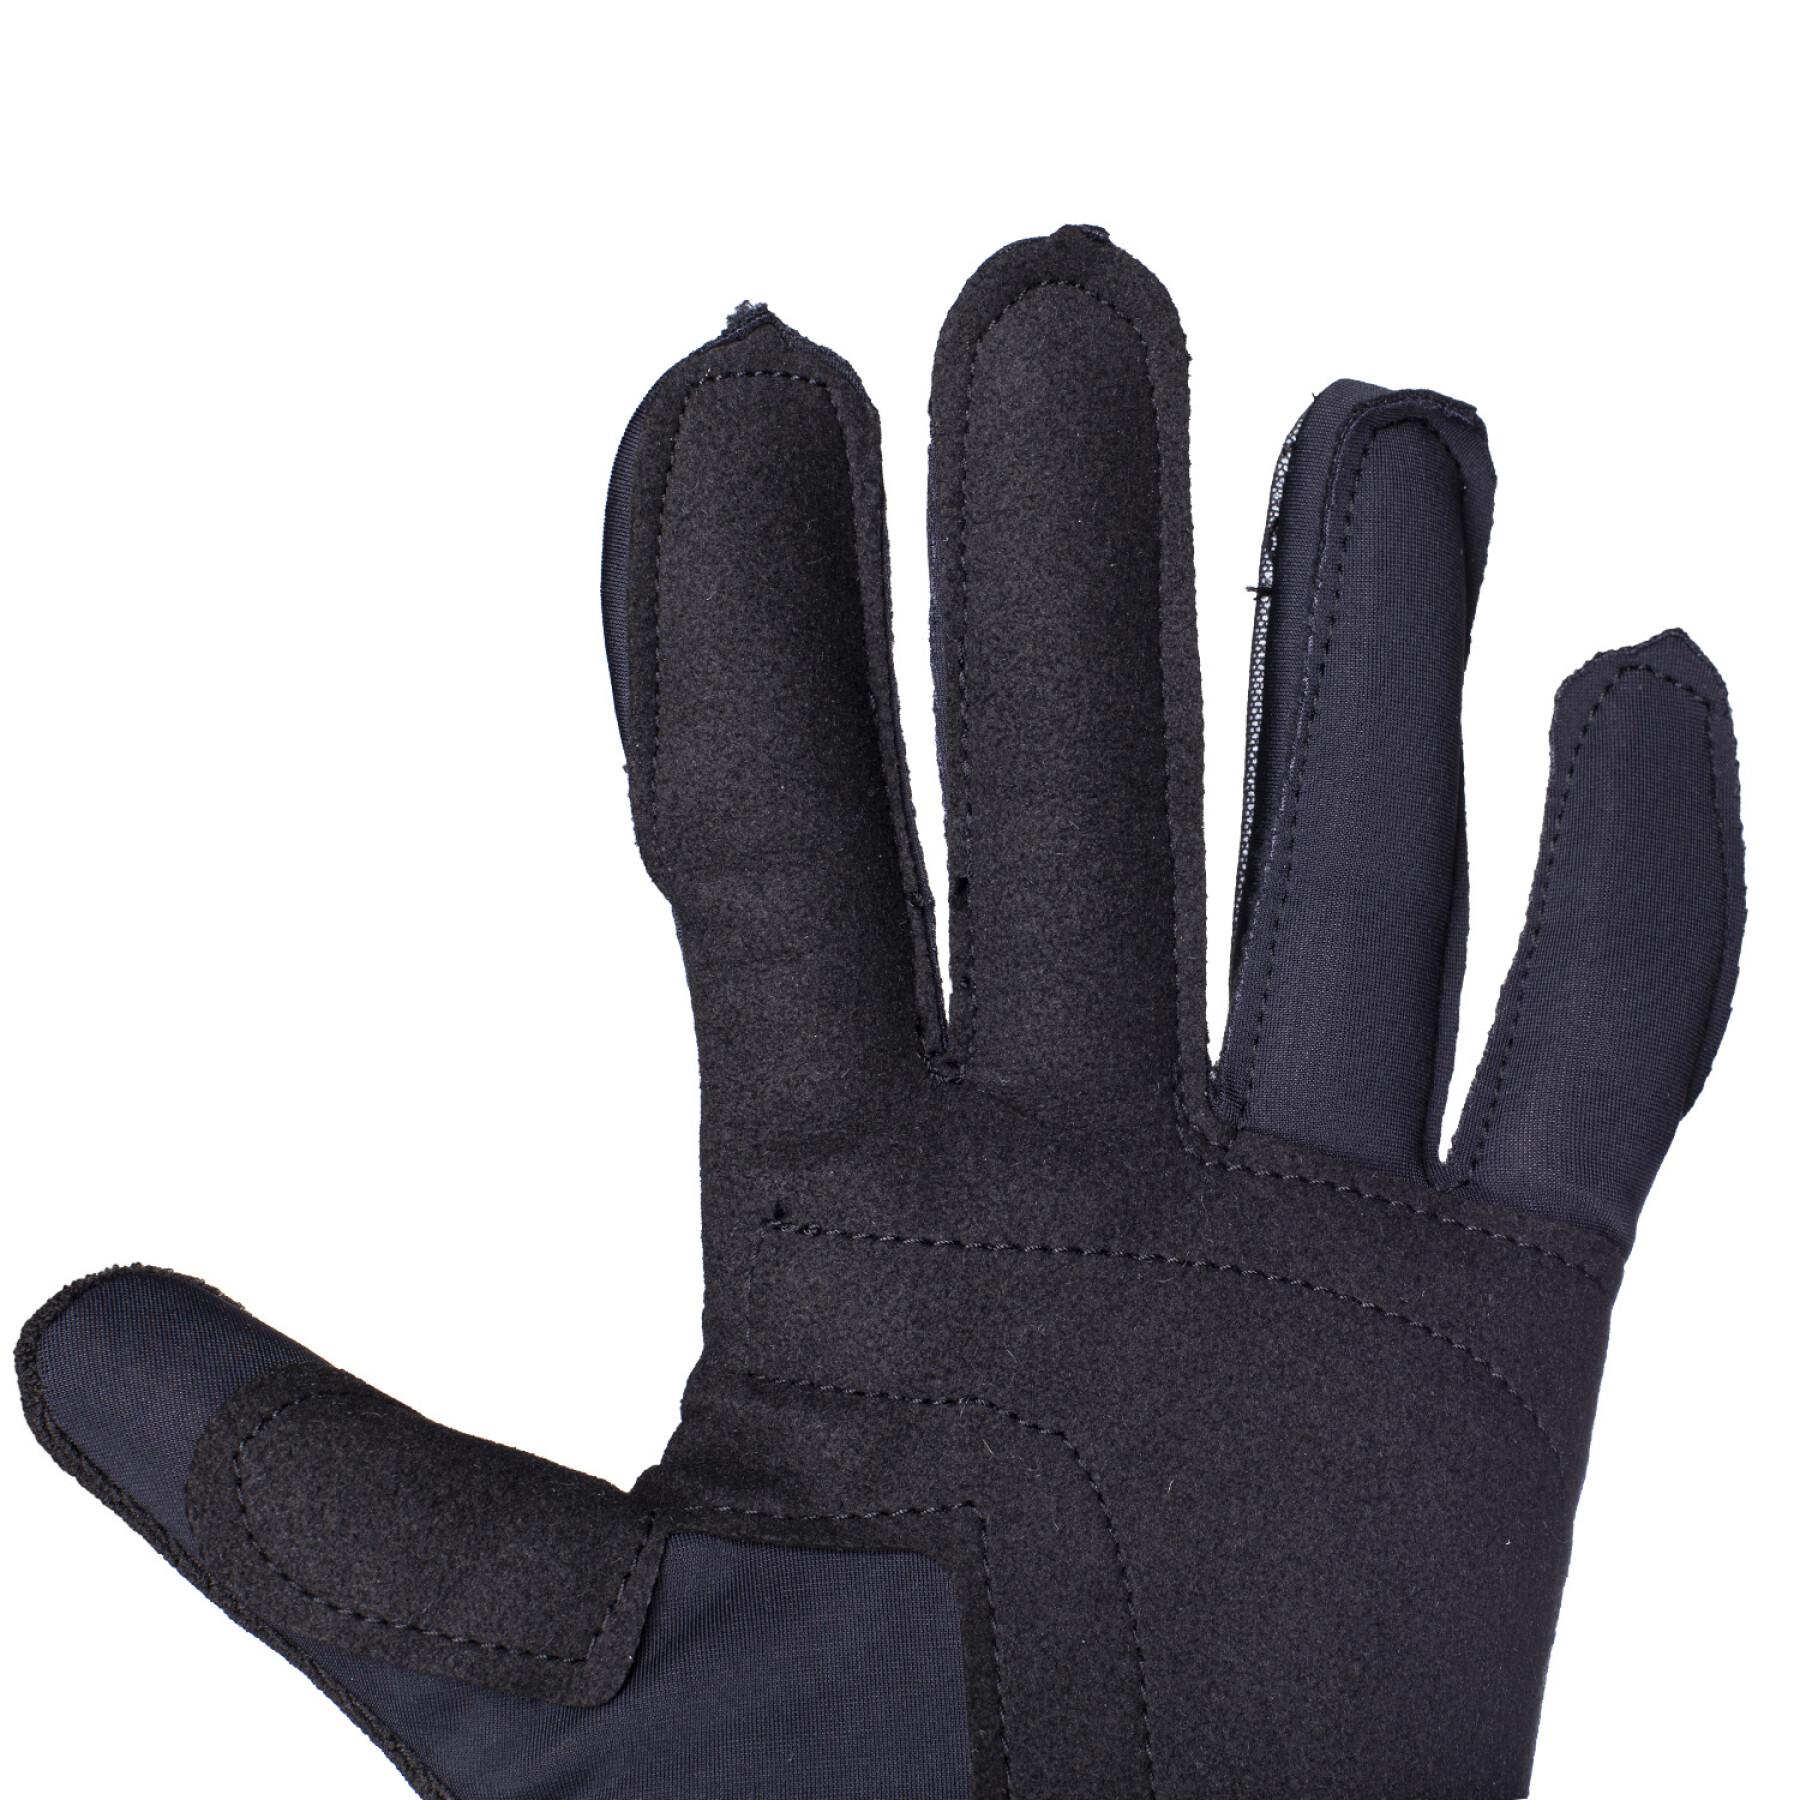 Mittens Bioracer One Tempest Protect